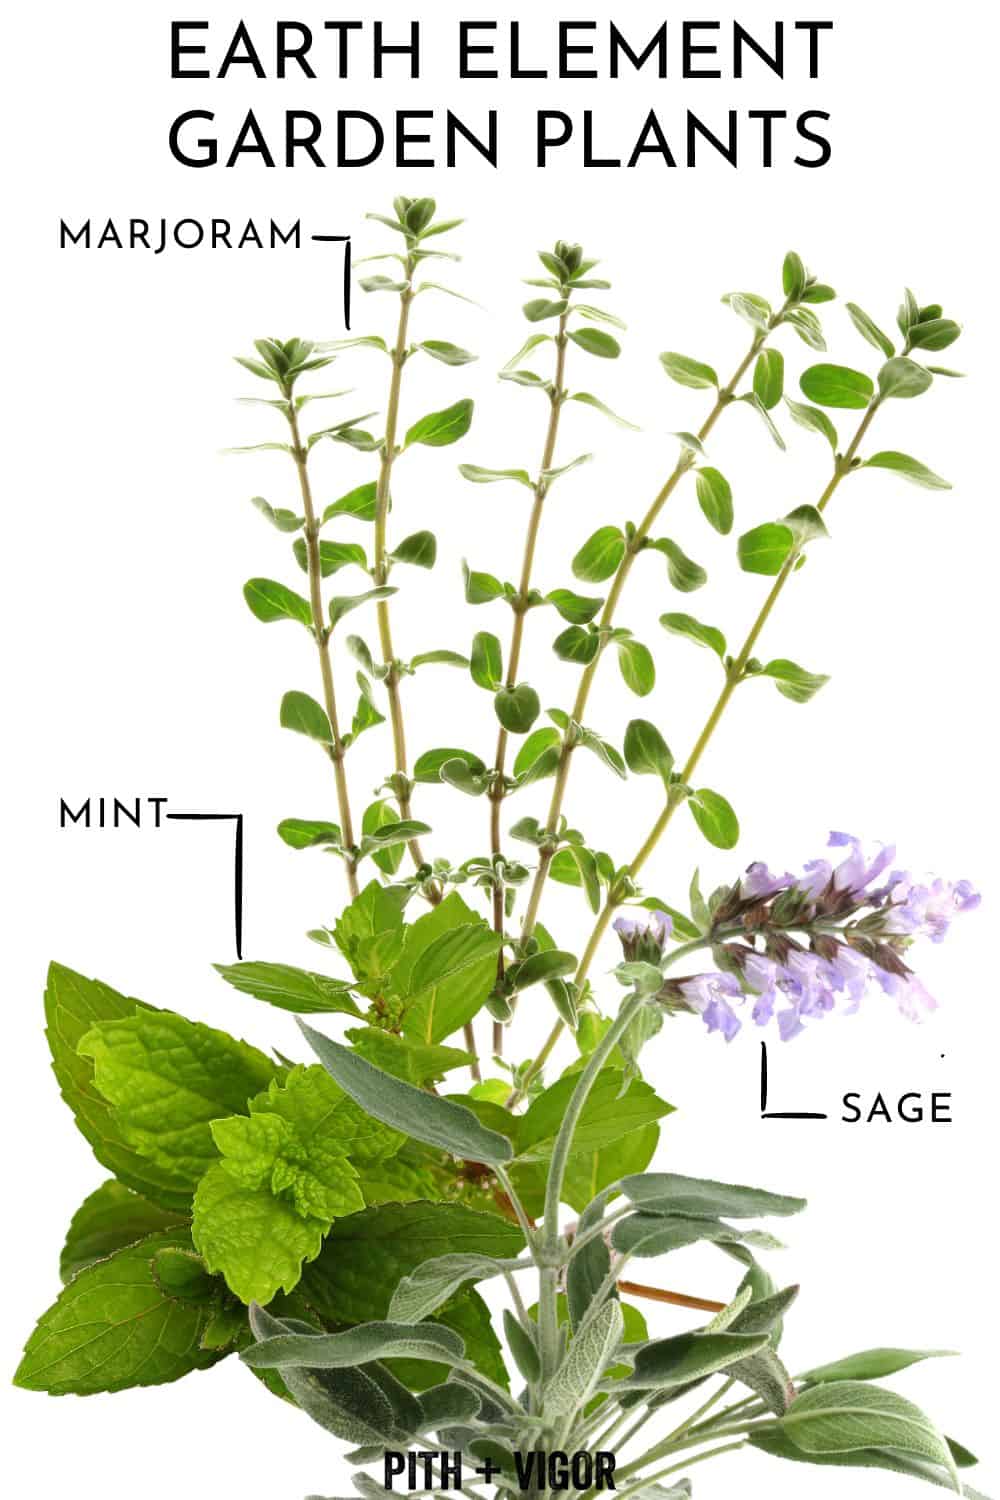 A botanical illustration labeled "Earth Element Garden Plants" displays three types of herbs ideal for a yoga garden: marjoram with small oval leaves, mint with broad green leaves, and sage with elongated leaves and a purple flower. The image is credited to Pith + Vigor.